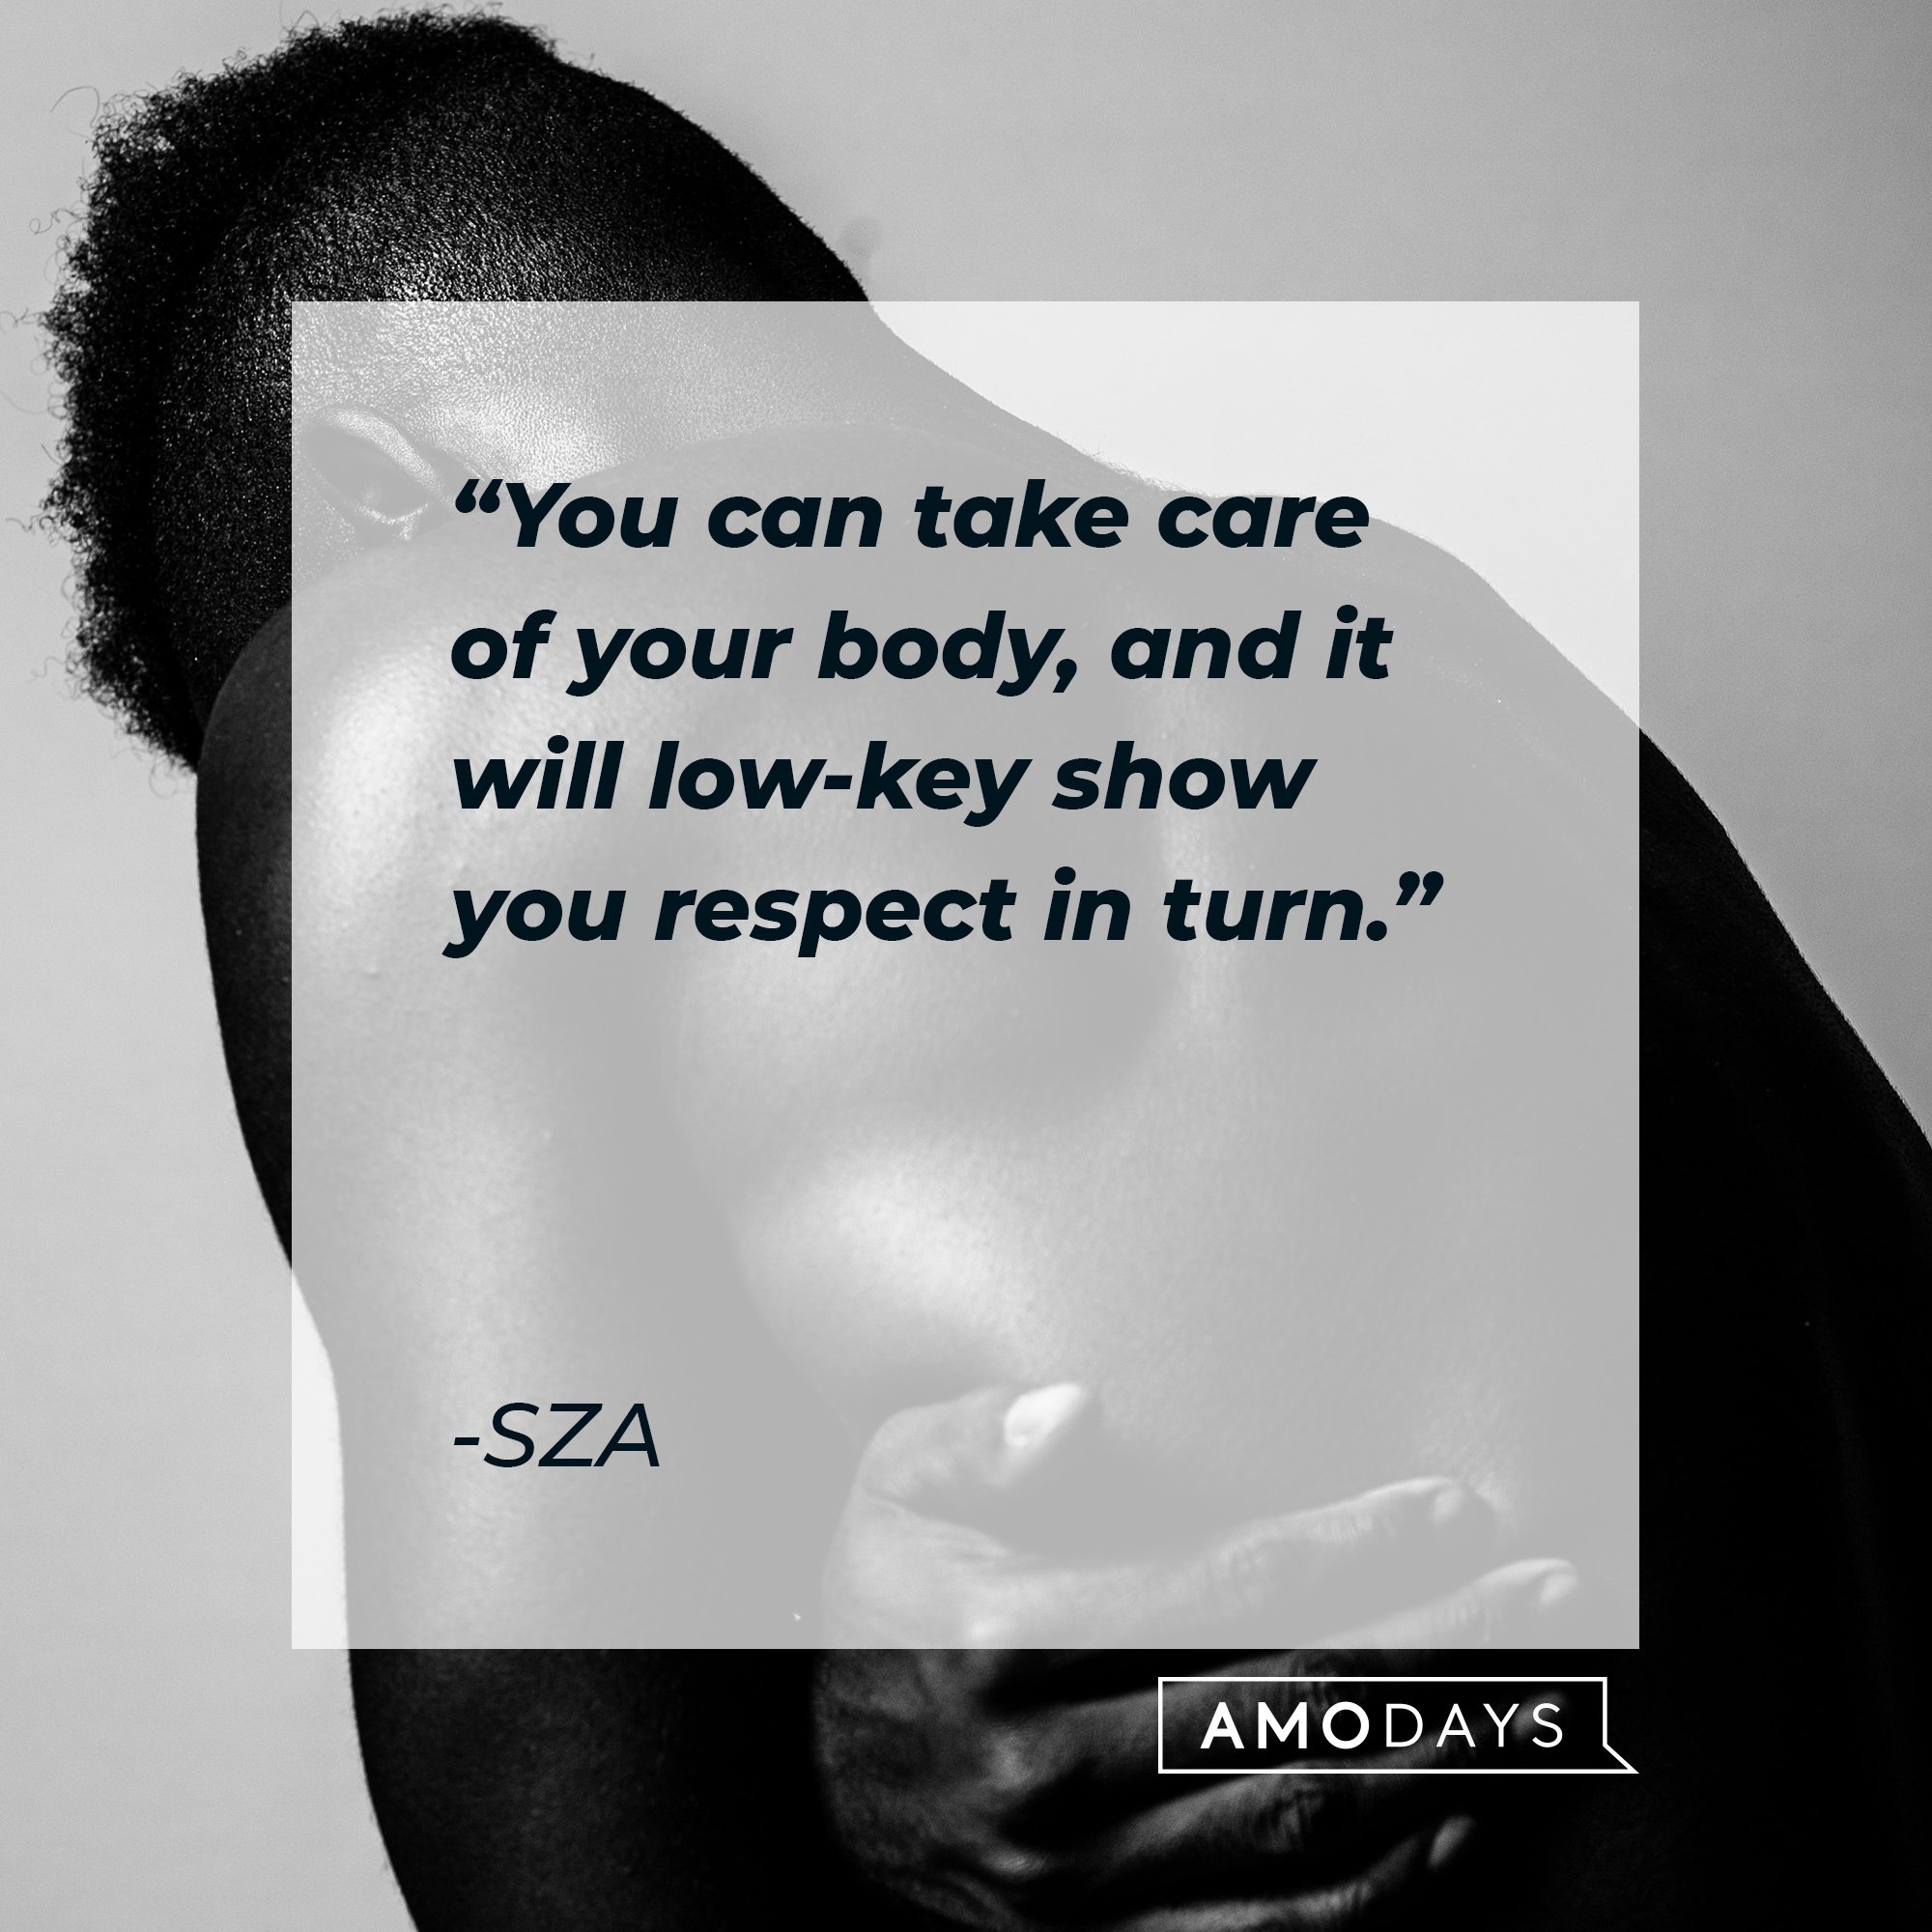 SZA’s quote: "You can take care of your body, and it will low-key show respect you in turn." | Image: AmoDays